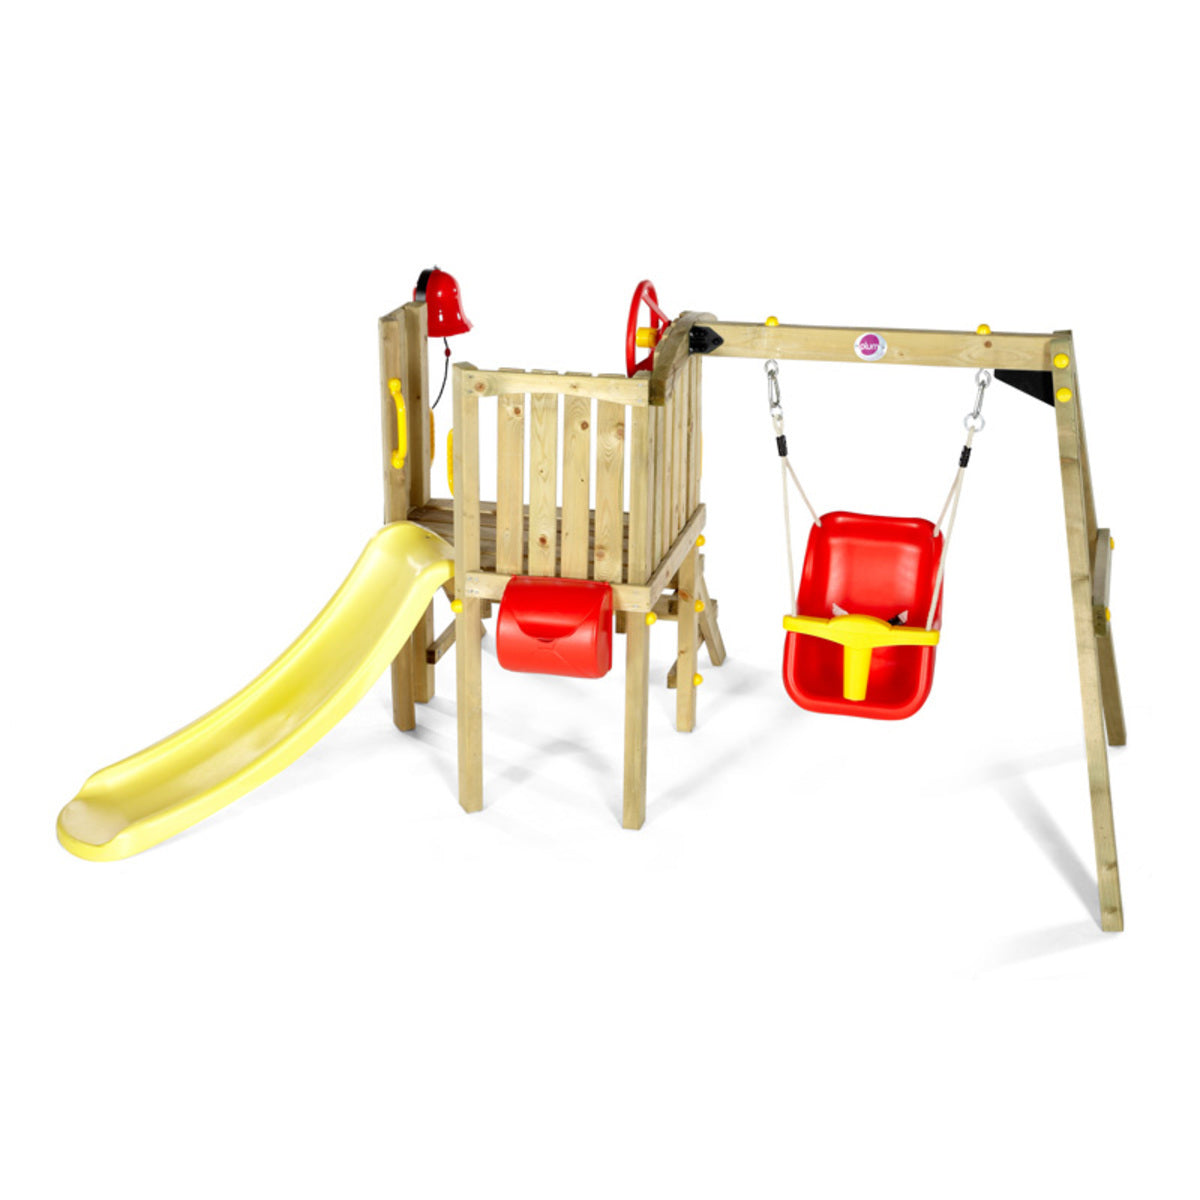 Plum Toddlers Tower Wooden Play Centre (1+ Years)Plum Toddlers Tower Wooden Play Centre (1+ Years)